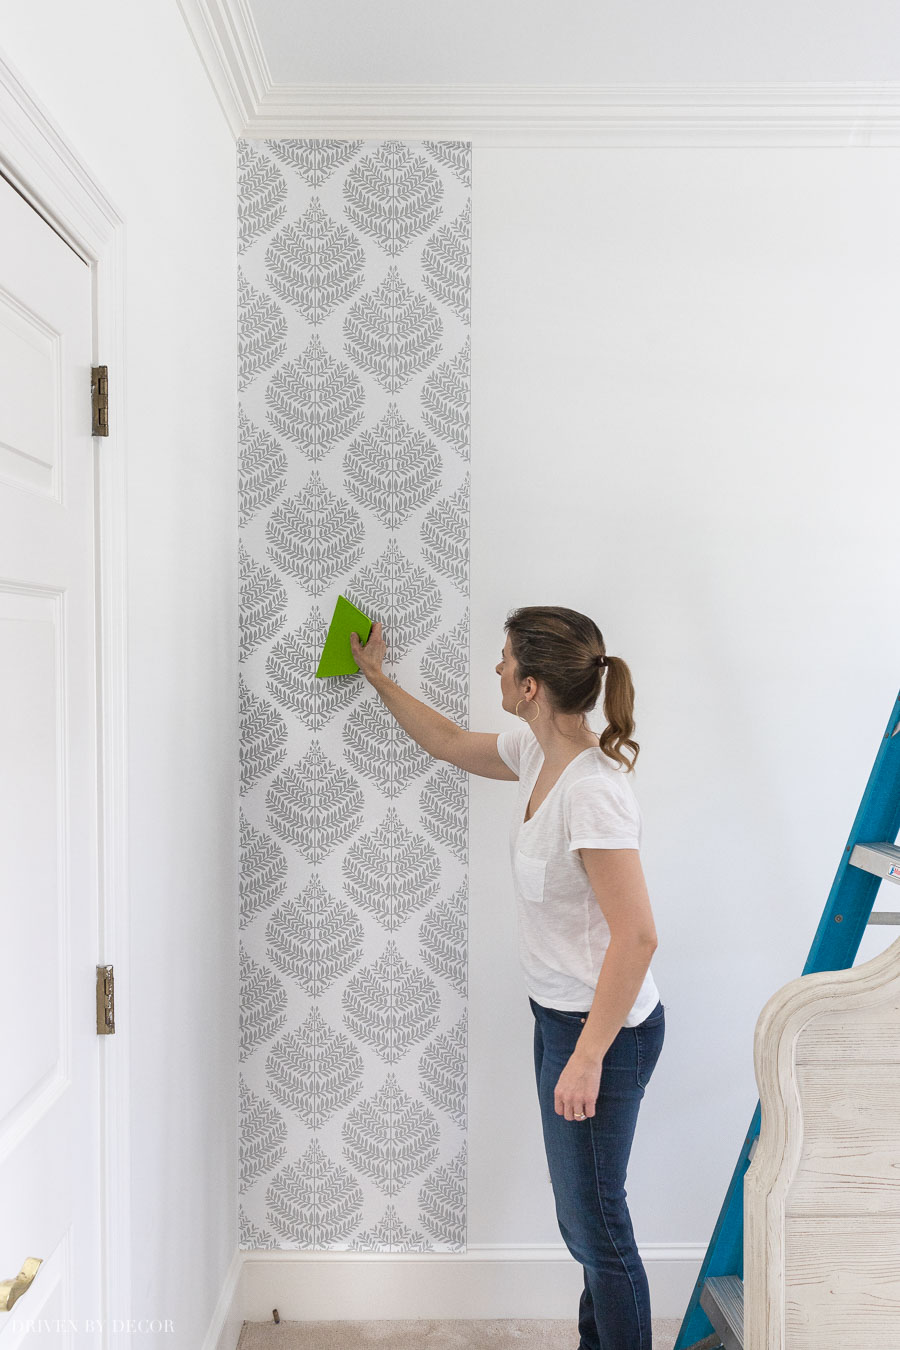 She Covered her Walls in What??? DIY Wallpaper Alternatives - The